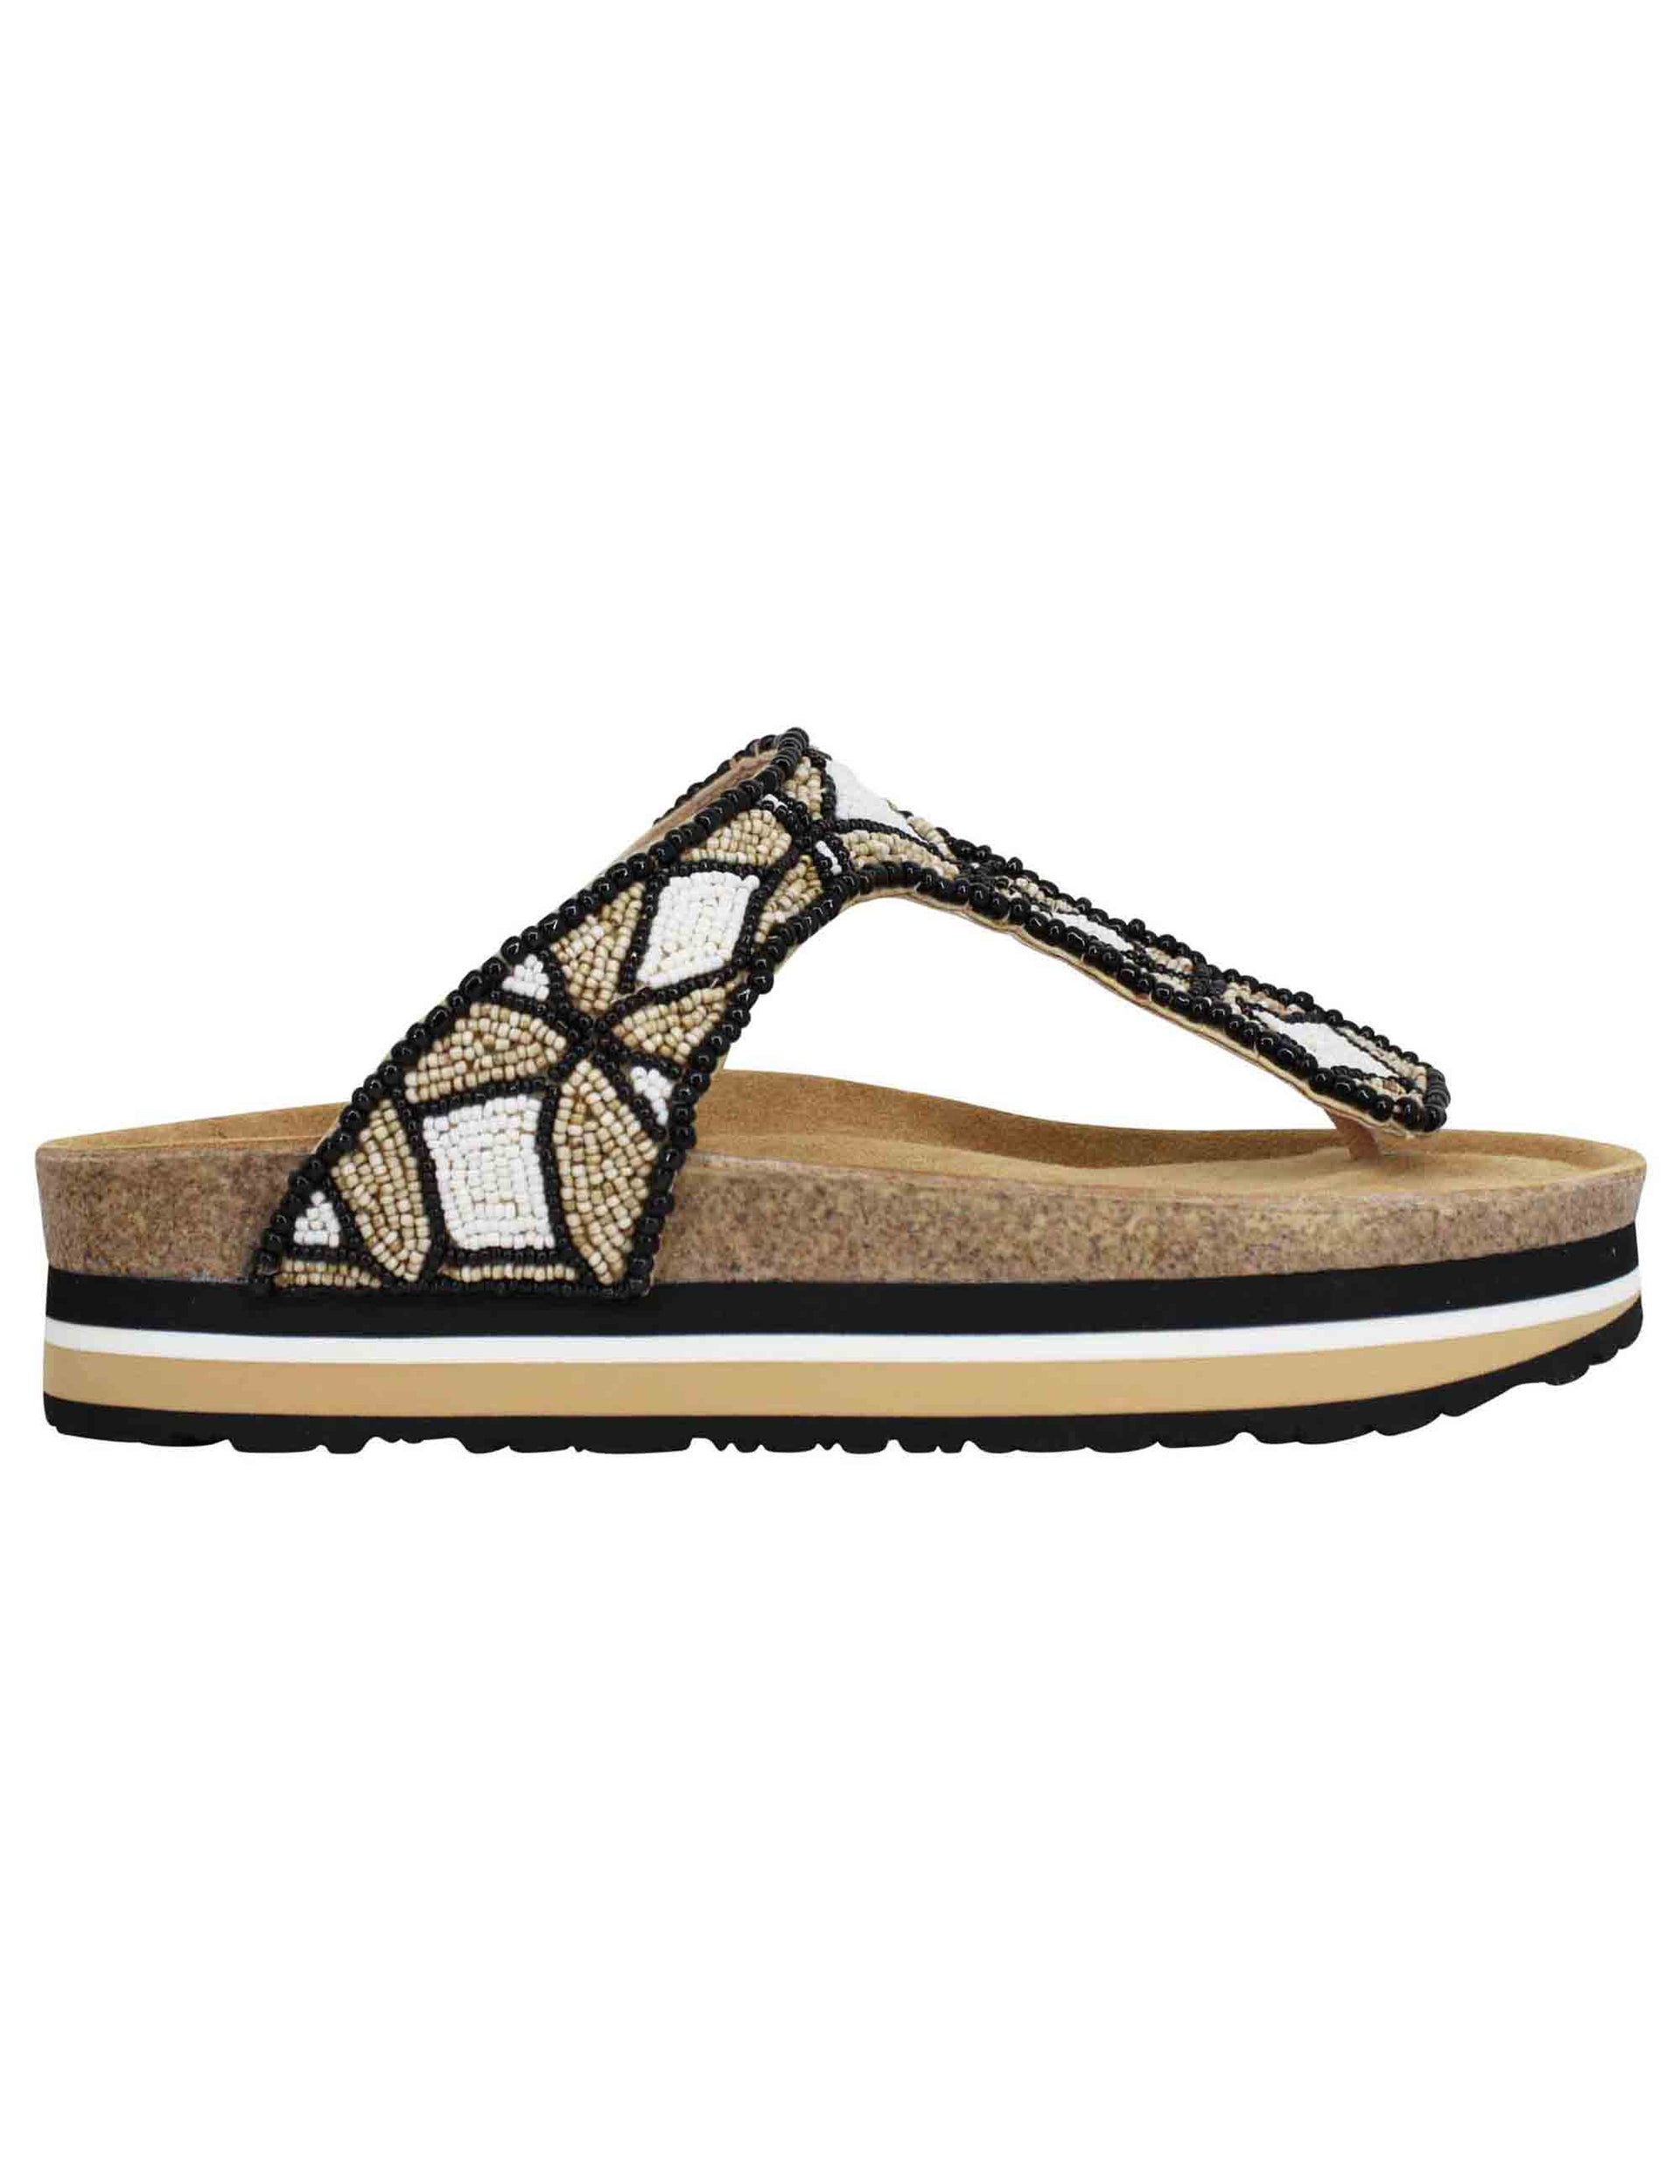 Infrabijoux women's Gioia Embroidery sandals in brown beads